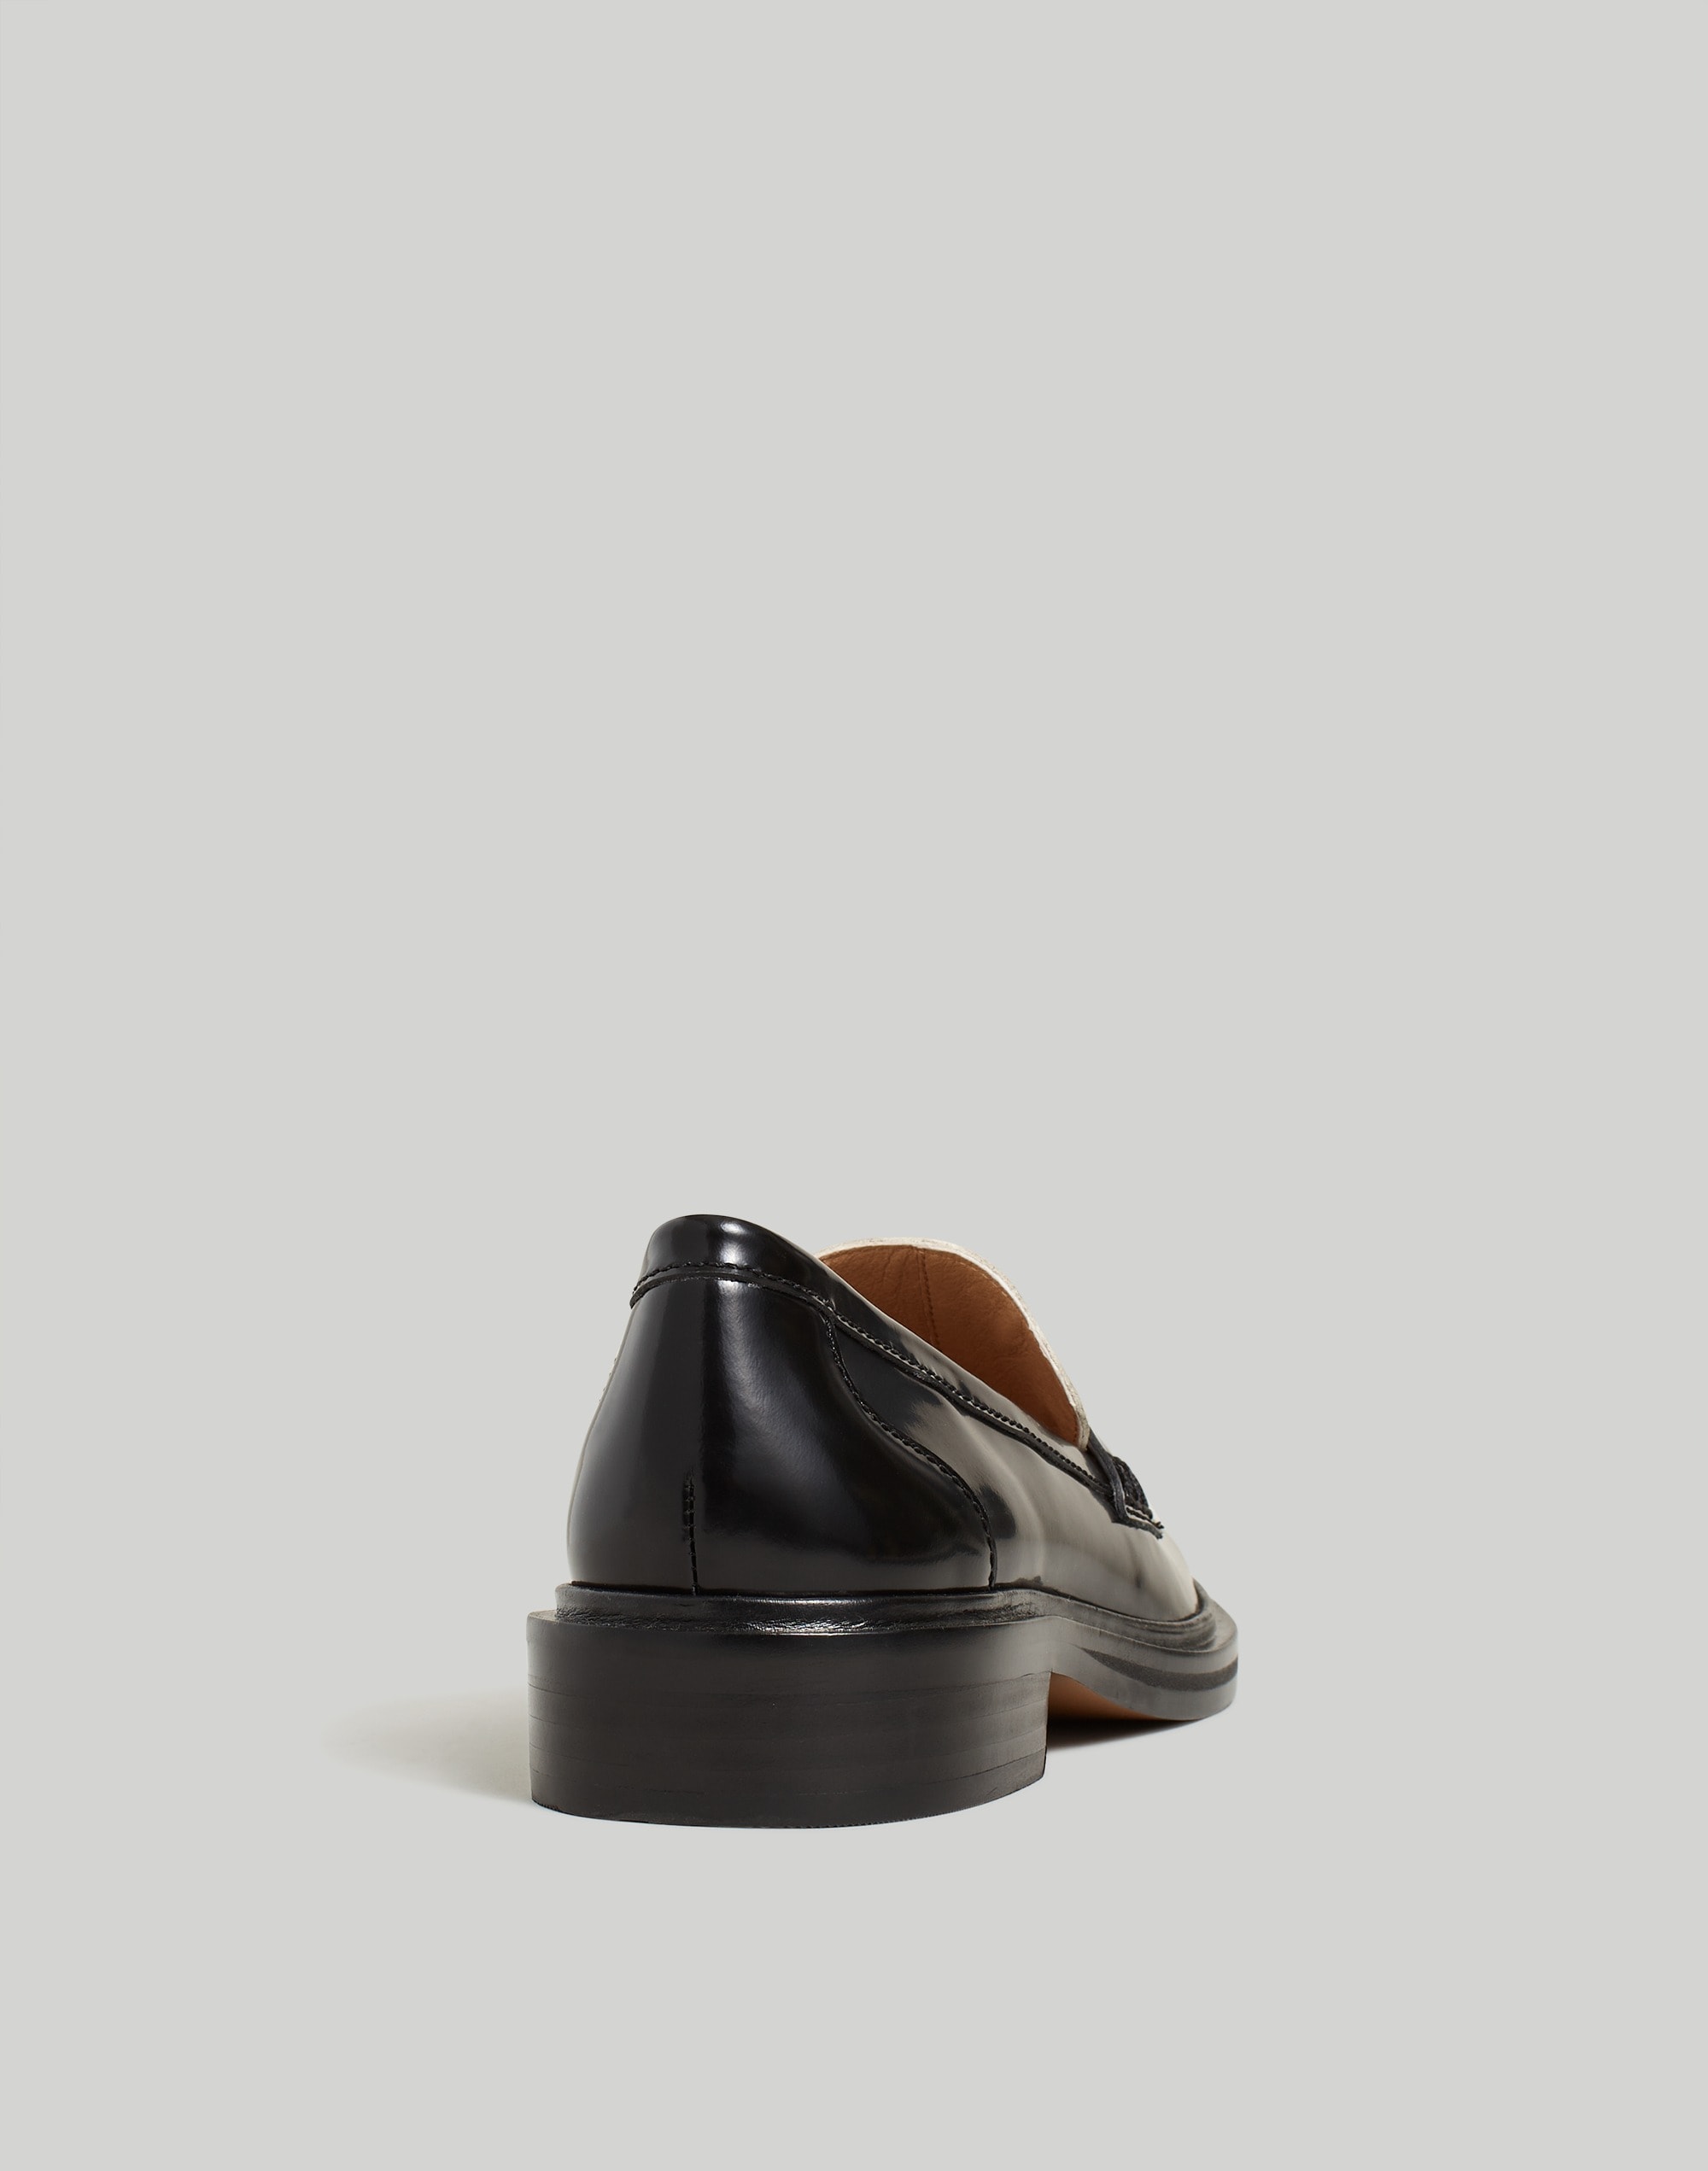 The Vernon Loafer Leather